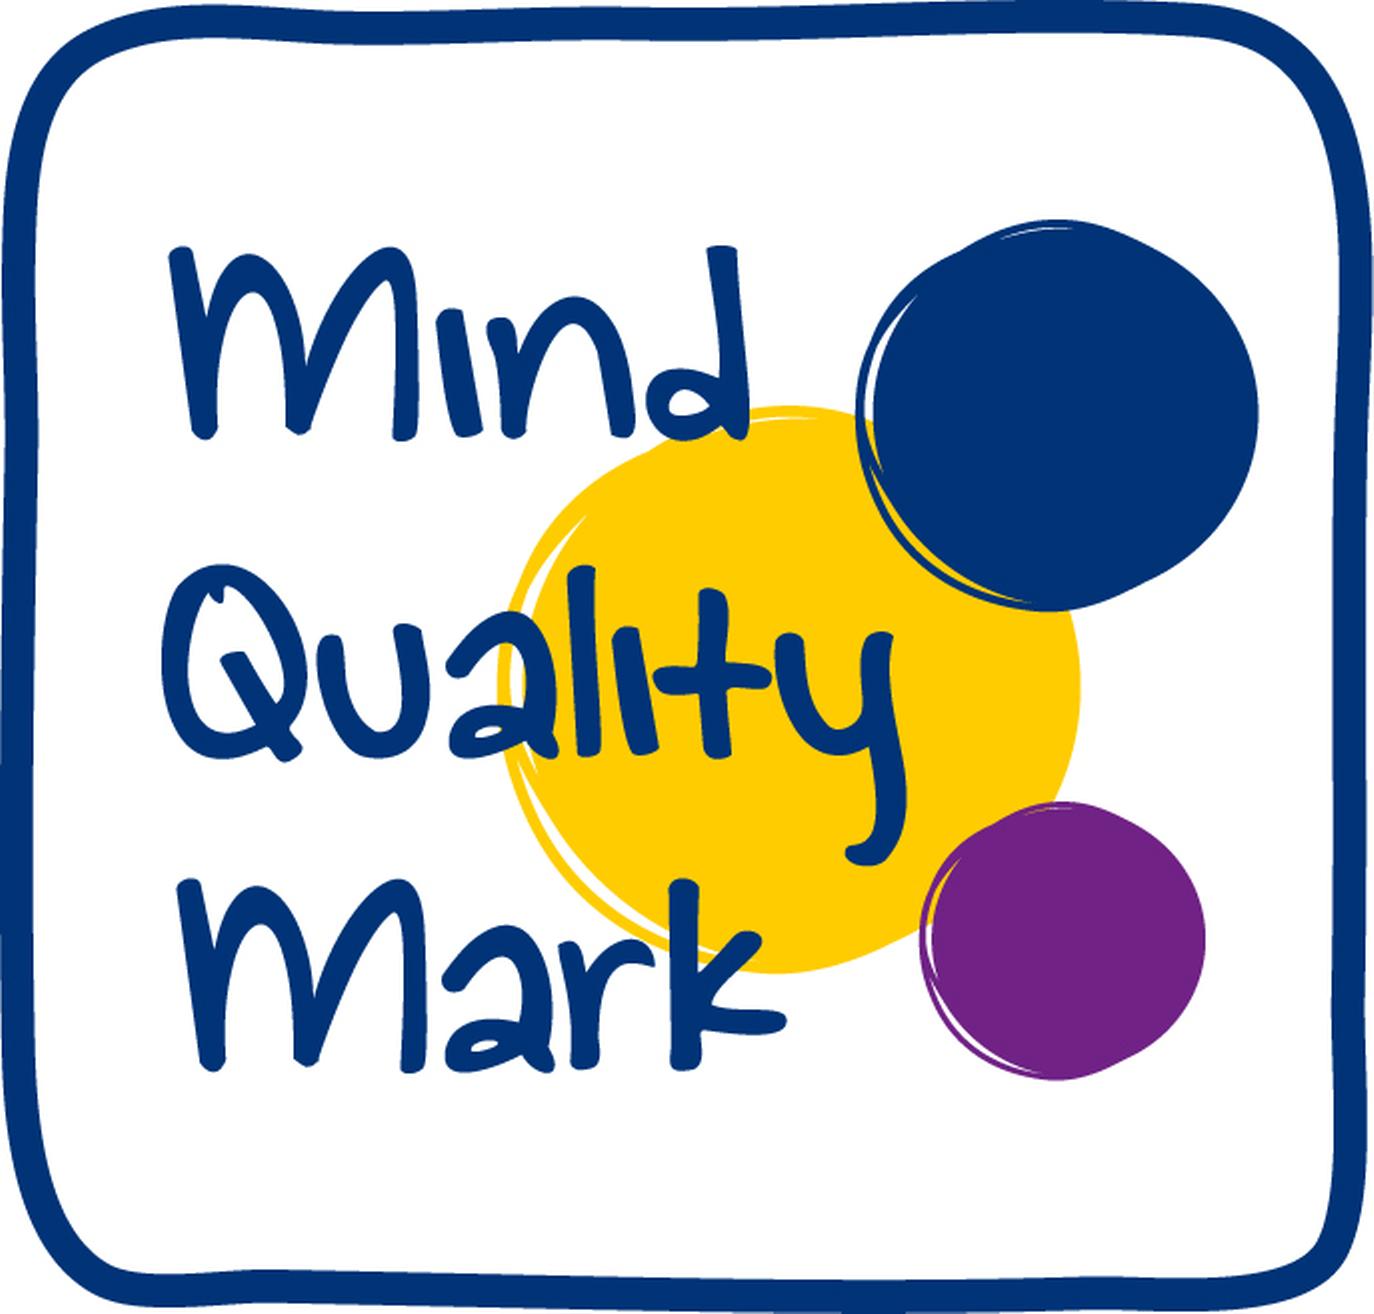 MITHN awarded the Mind Quality Mark